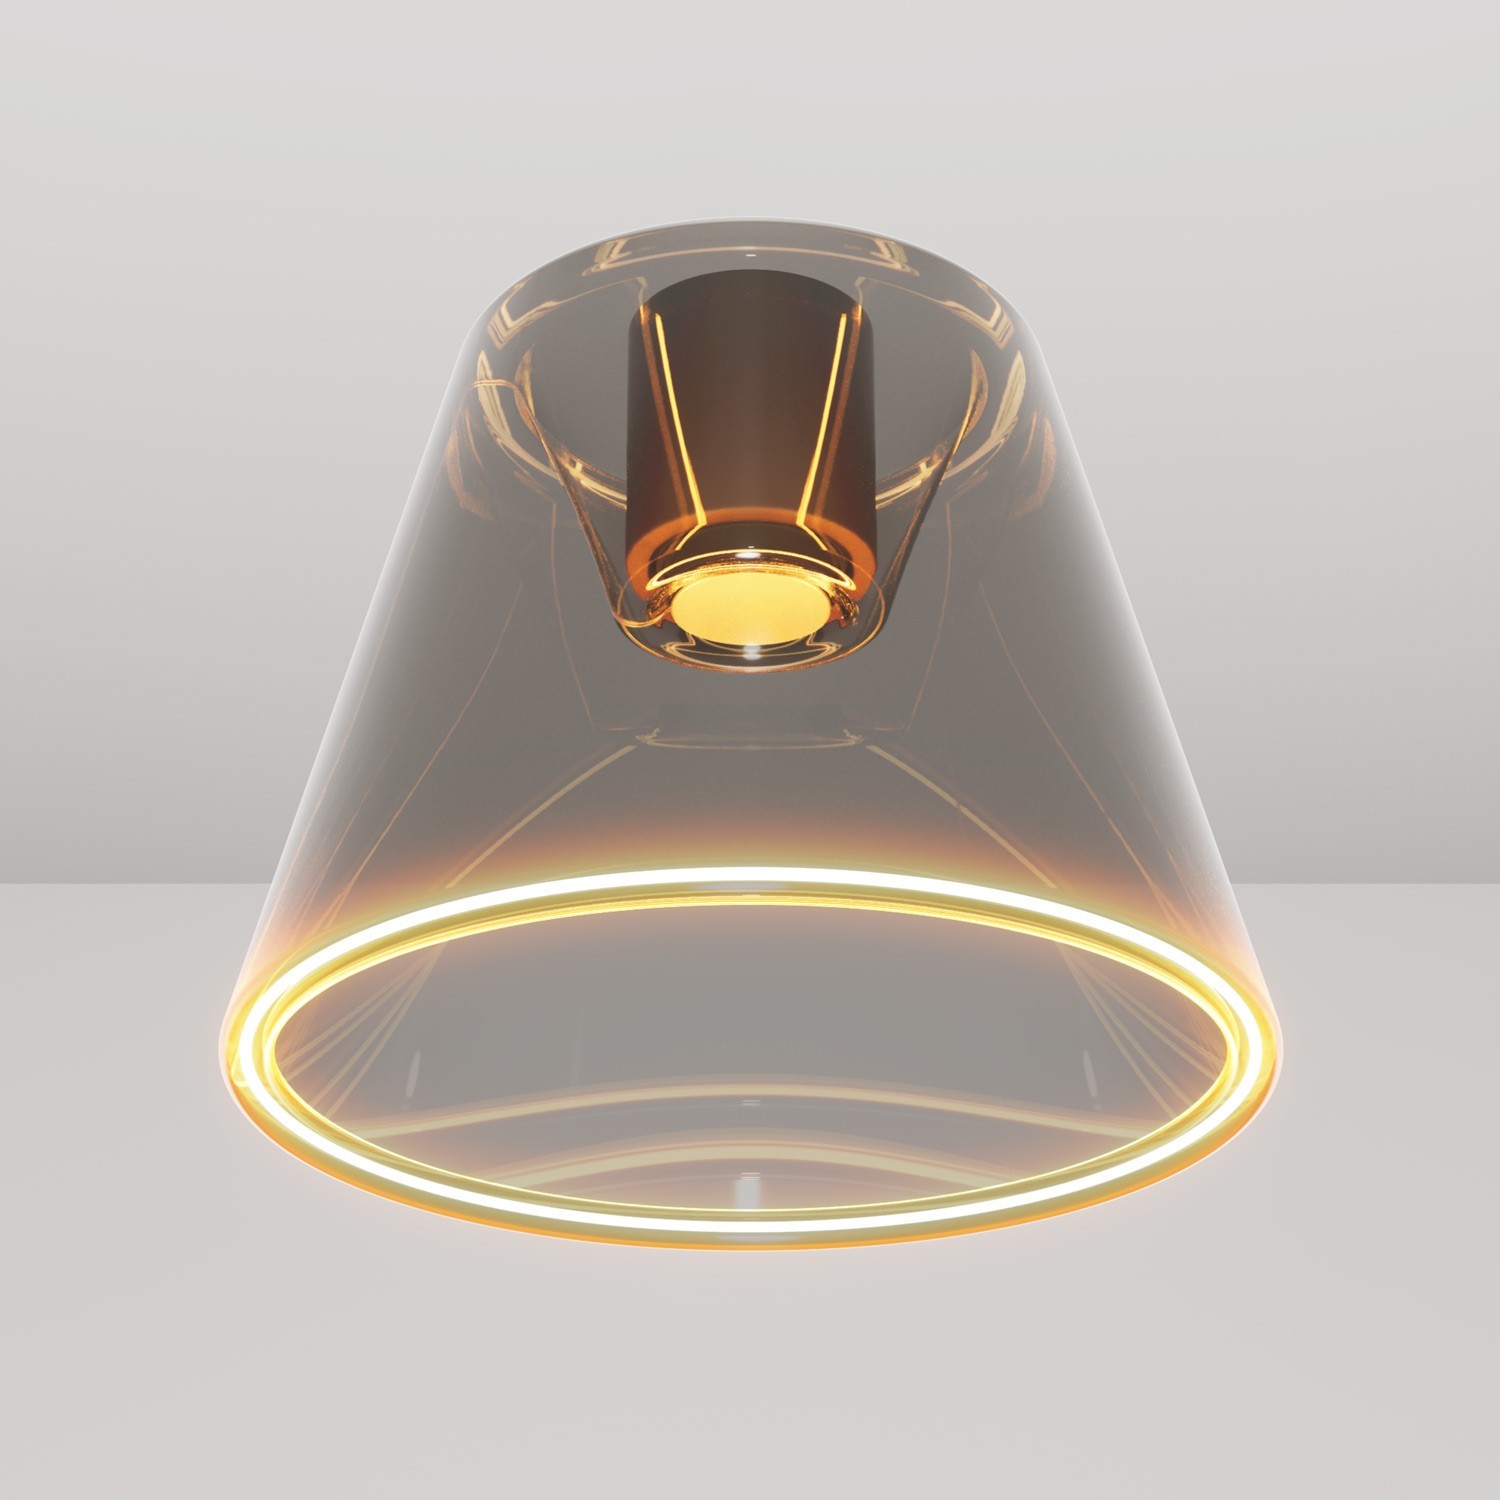 Design ceiling light with smoky cone-shaped Ghost bulb